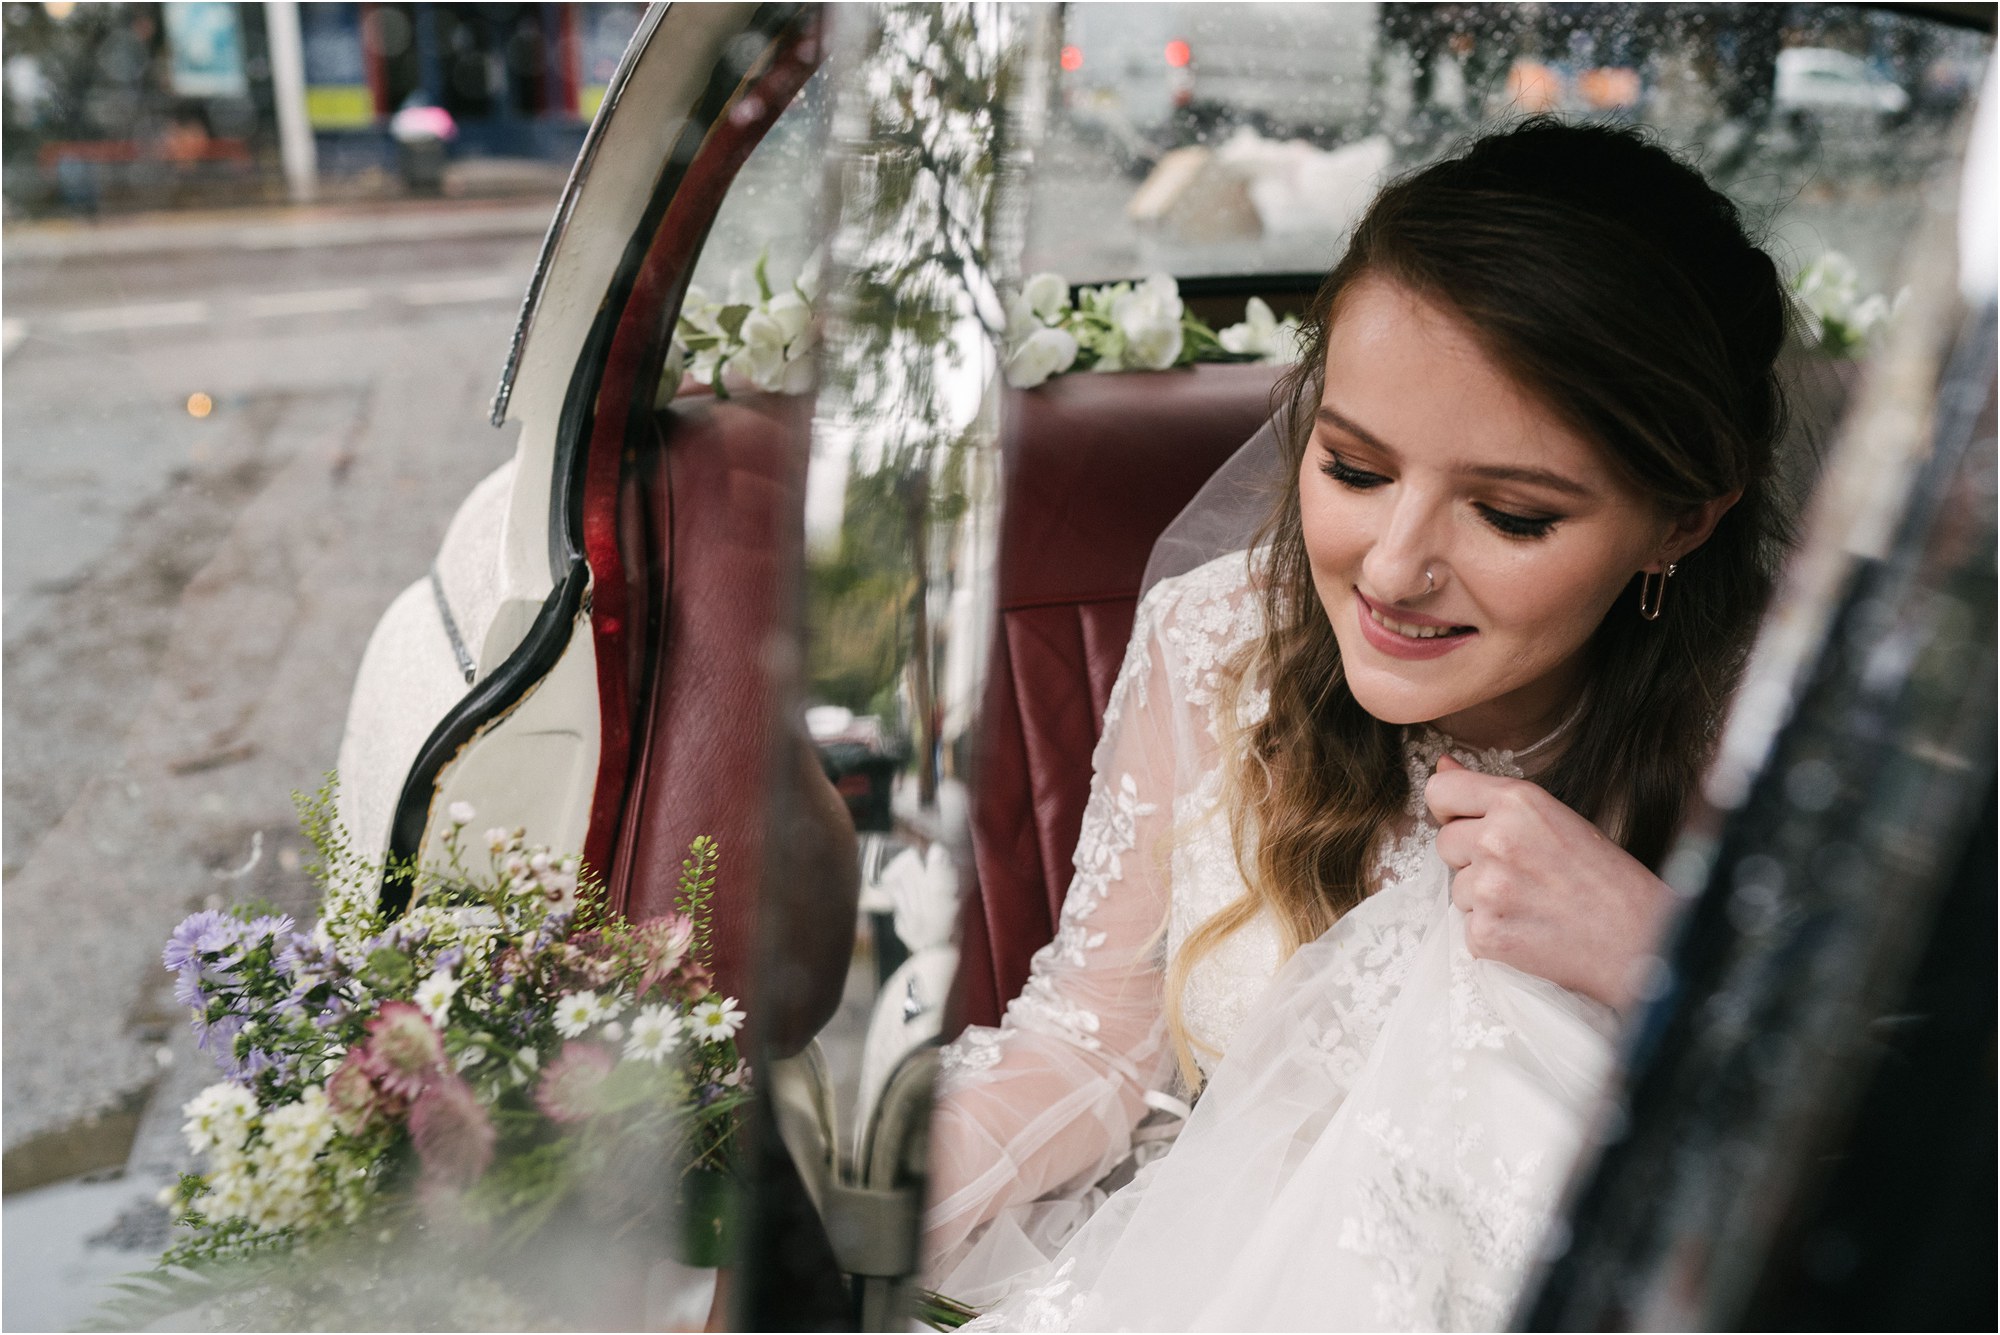 Bride arriving for wedding at The Round Chapel in Hackney, London